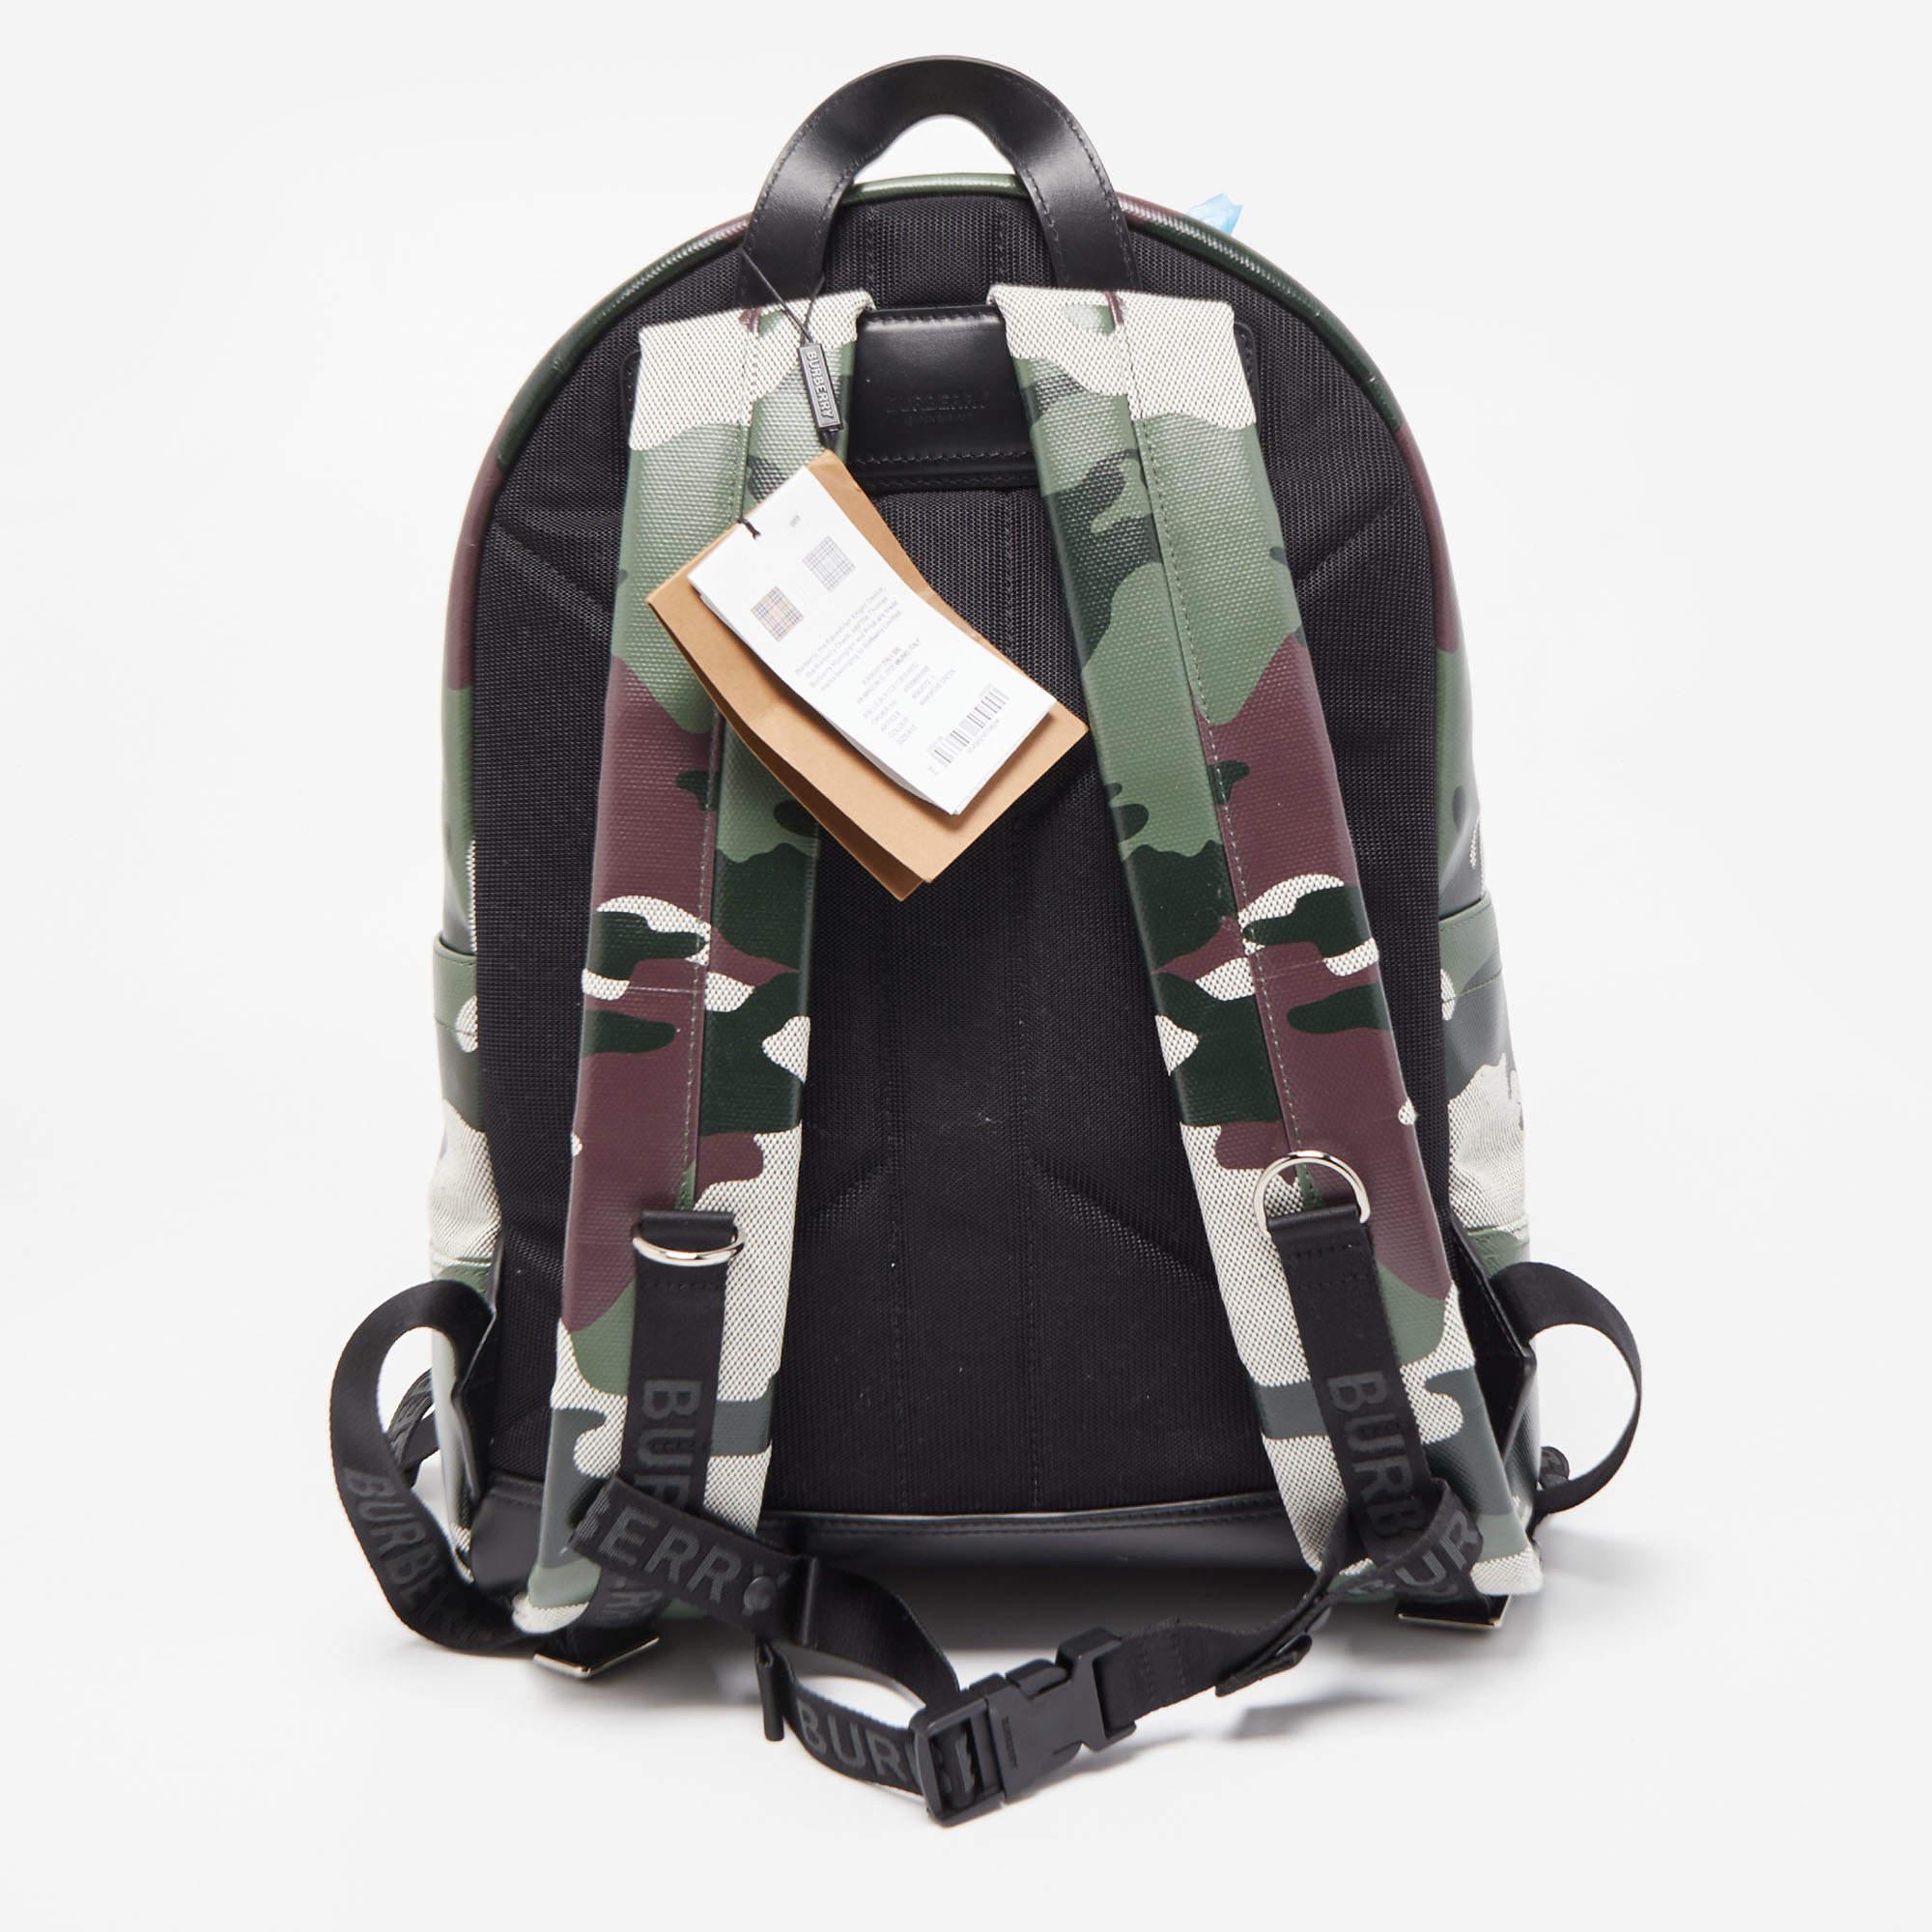 This practical and fashionable backpack will come in handy for daily use or as a style statement. It is smartly designed with a spacious interior for your belongings. Two shoulder straps make it ready to be yours.

